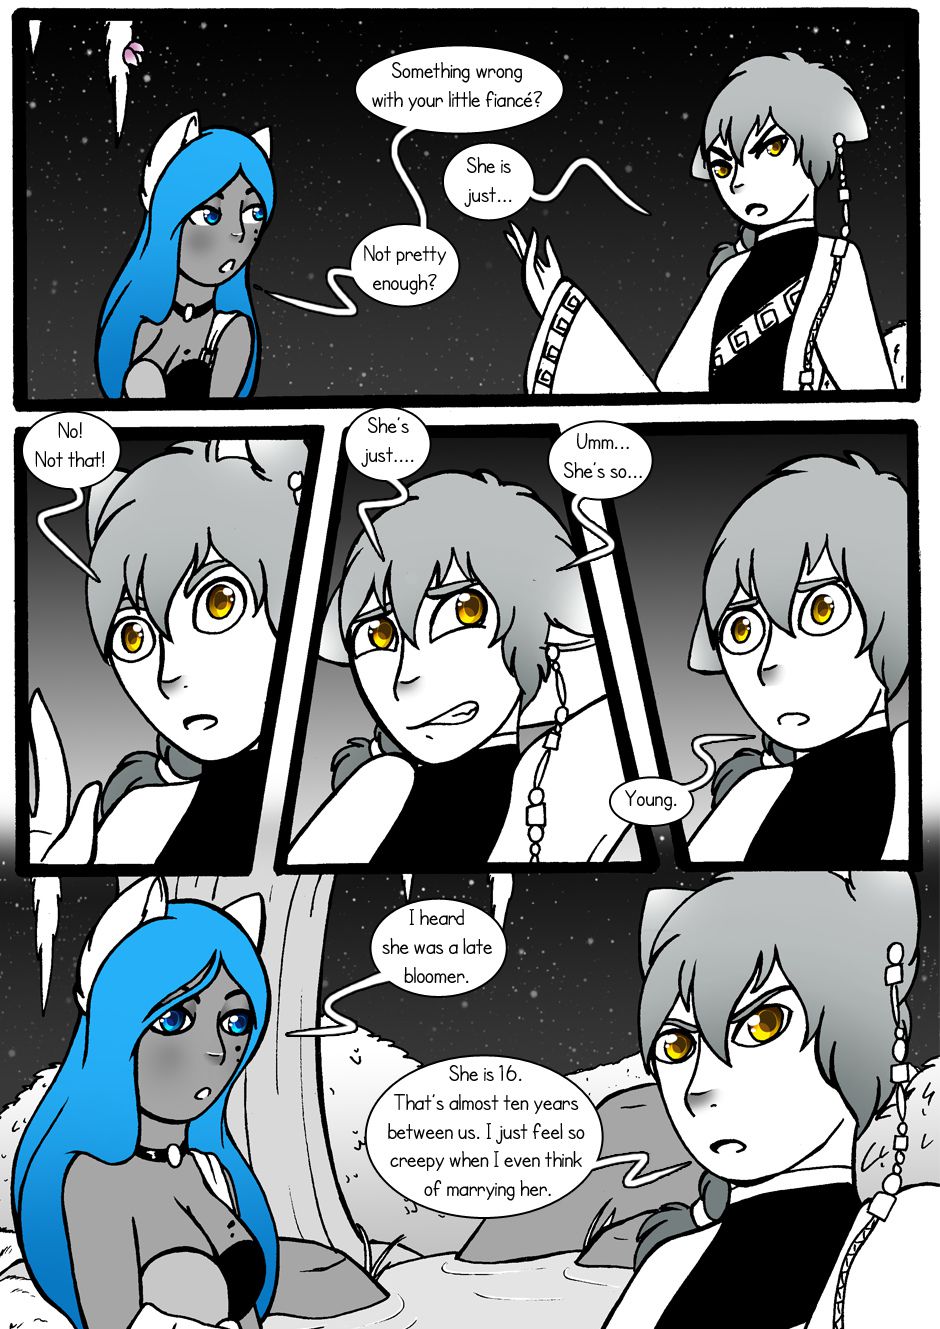 [Jeny-jen94] Between Kings and Queens [Ongoing] 79